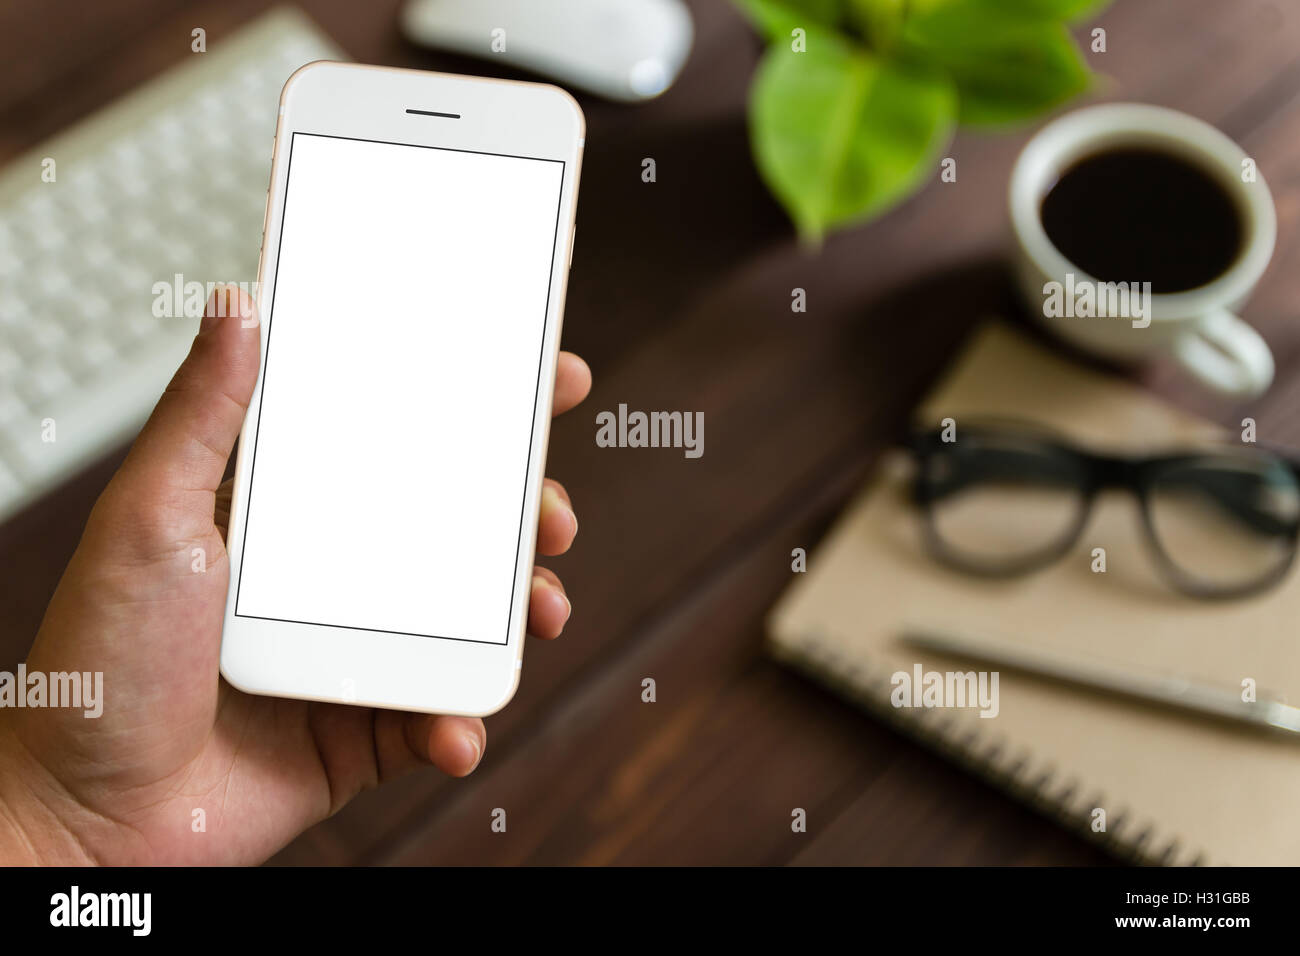 close up hand holding phone over work table, mockup phone blank screen for app screen adjustment Stock Photo